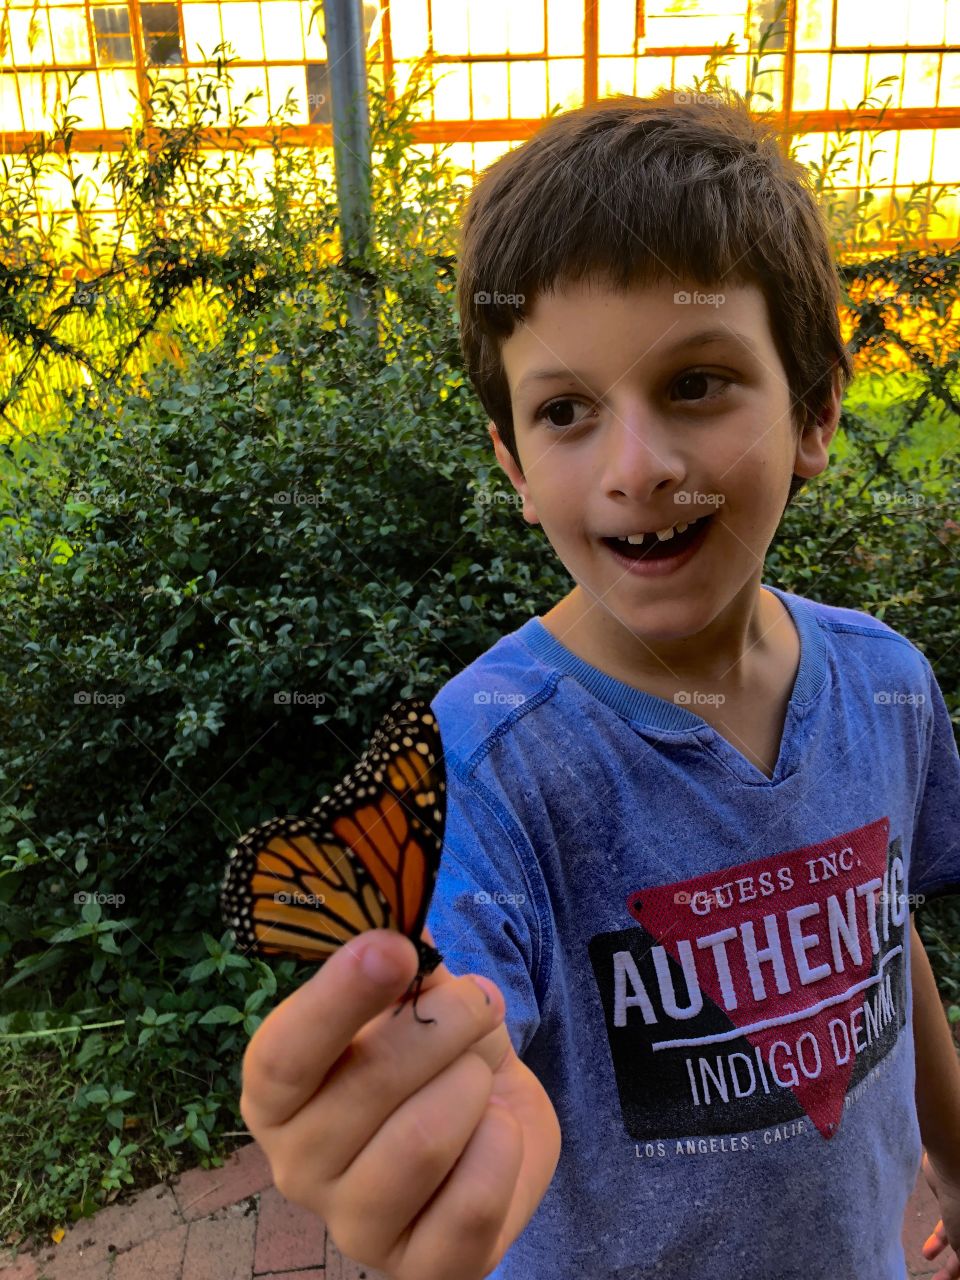 Boy with Butterfly